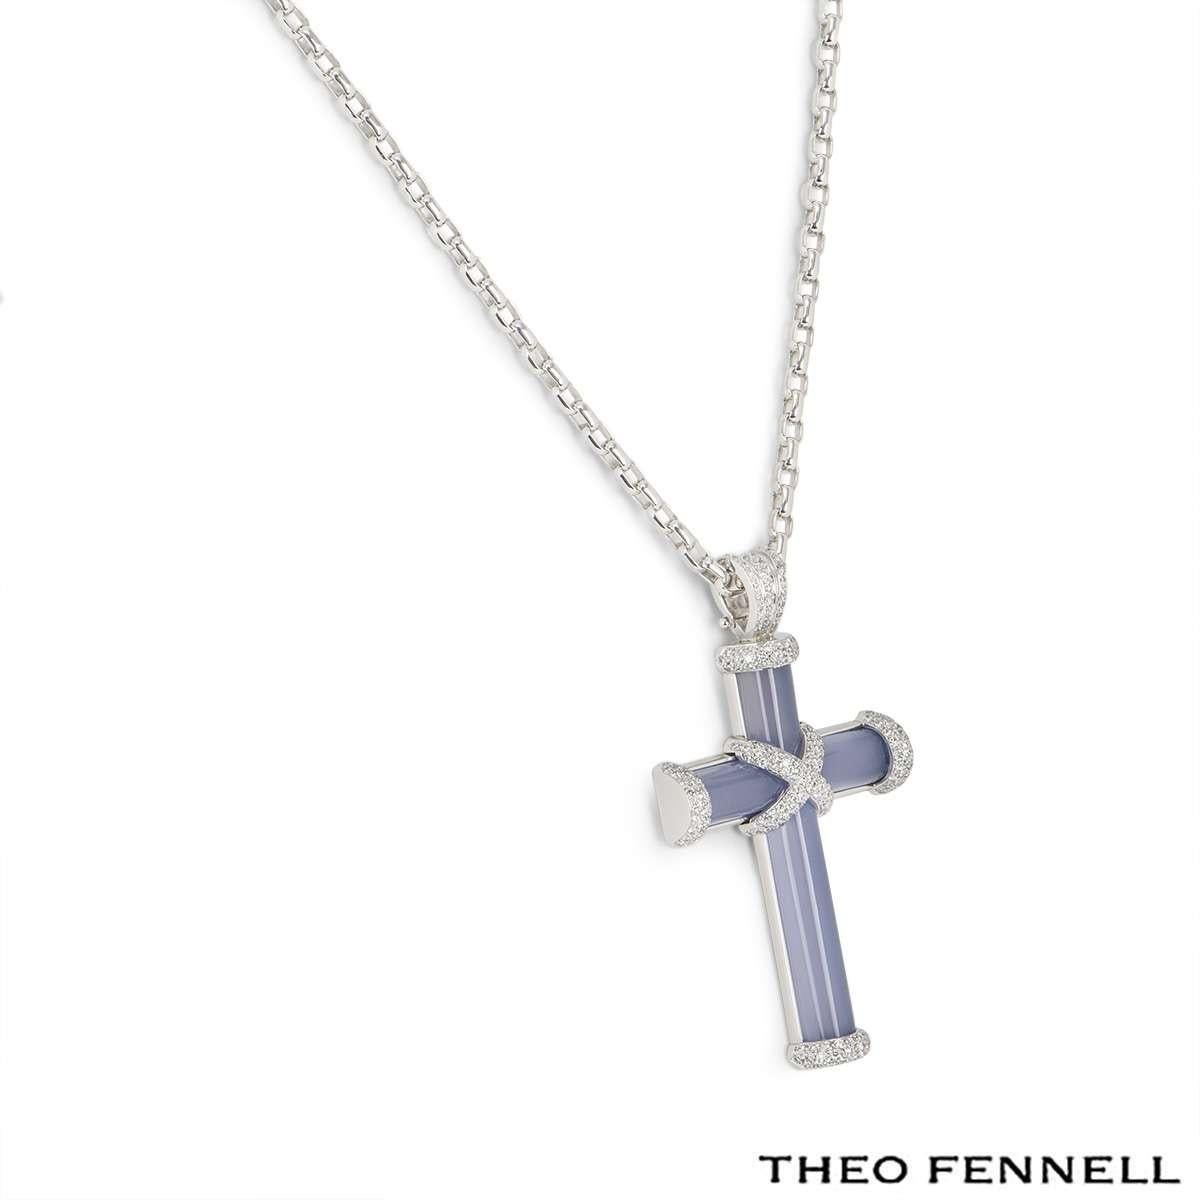 An 18k white gold cross pendant by Theo Fennell. The pendant is formed of a polished blue semi-precious gemstone cross with pave set diamond accents totalling approximately 0.90ct. The cross measures 3.5cm in width, 6.5cm in length and comes on a